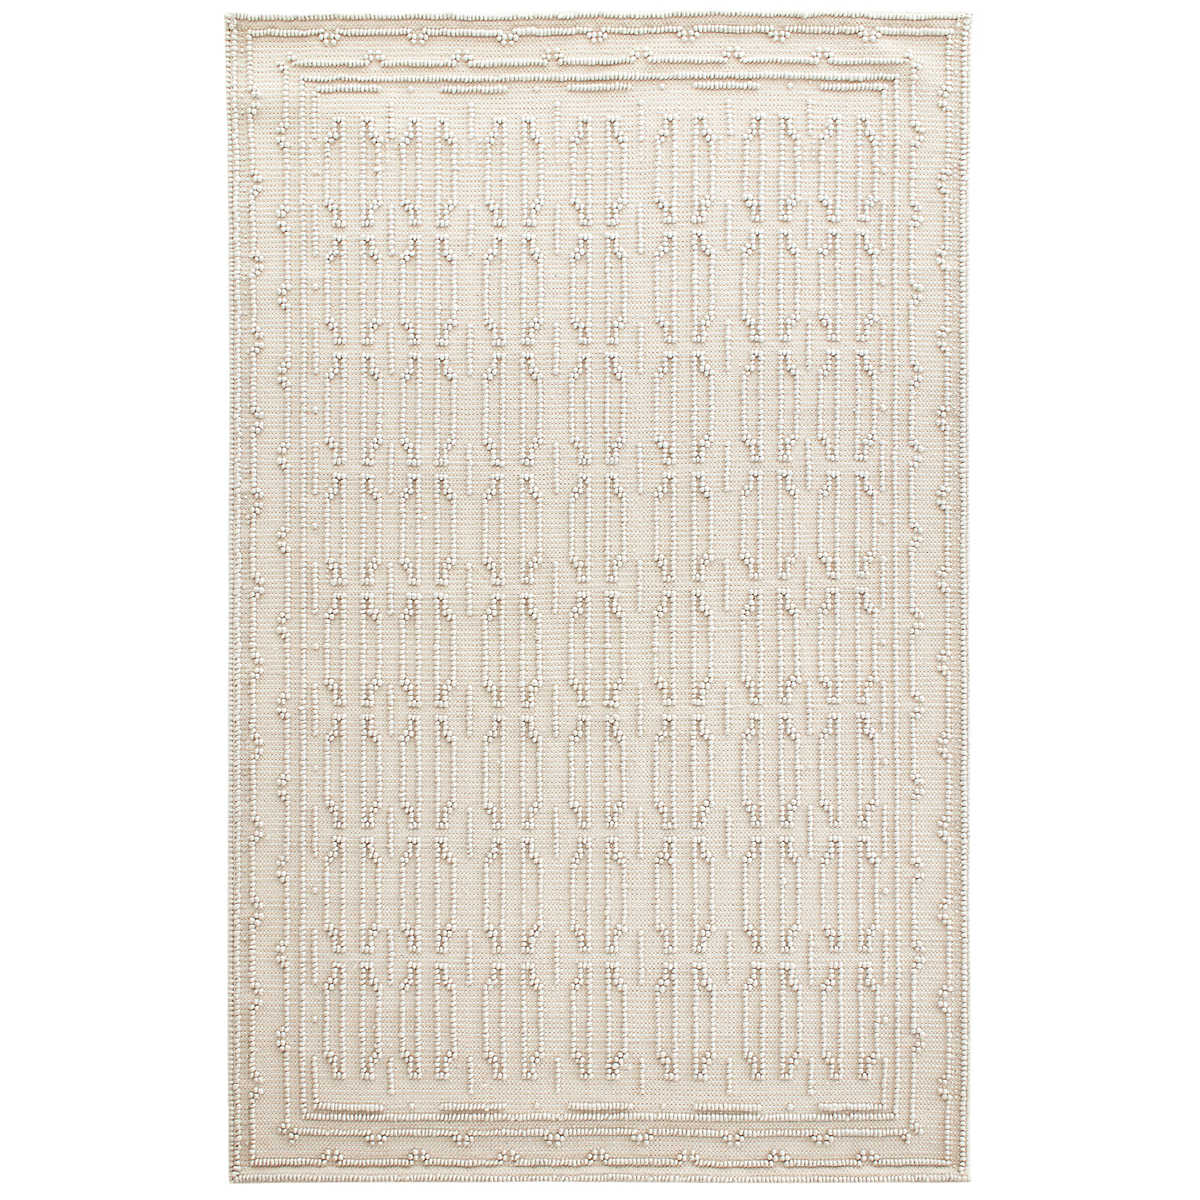 The Campbell Plaster Rug relief pattern plays across a gently marled woven wool ground, accentuating the graphic dimension created by the different weaves. The central motif is repeated inversely to create a border around this sumptuous rug. Amethyst Home provides interior design services, furniture, rugs, and lighting in the Dallas metro area.